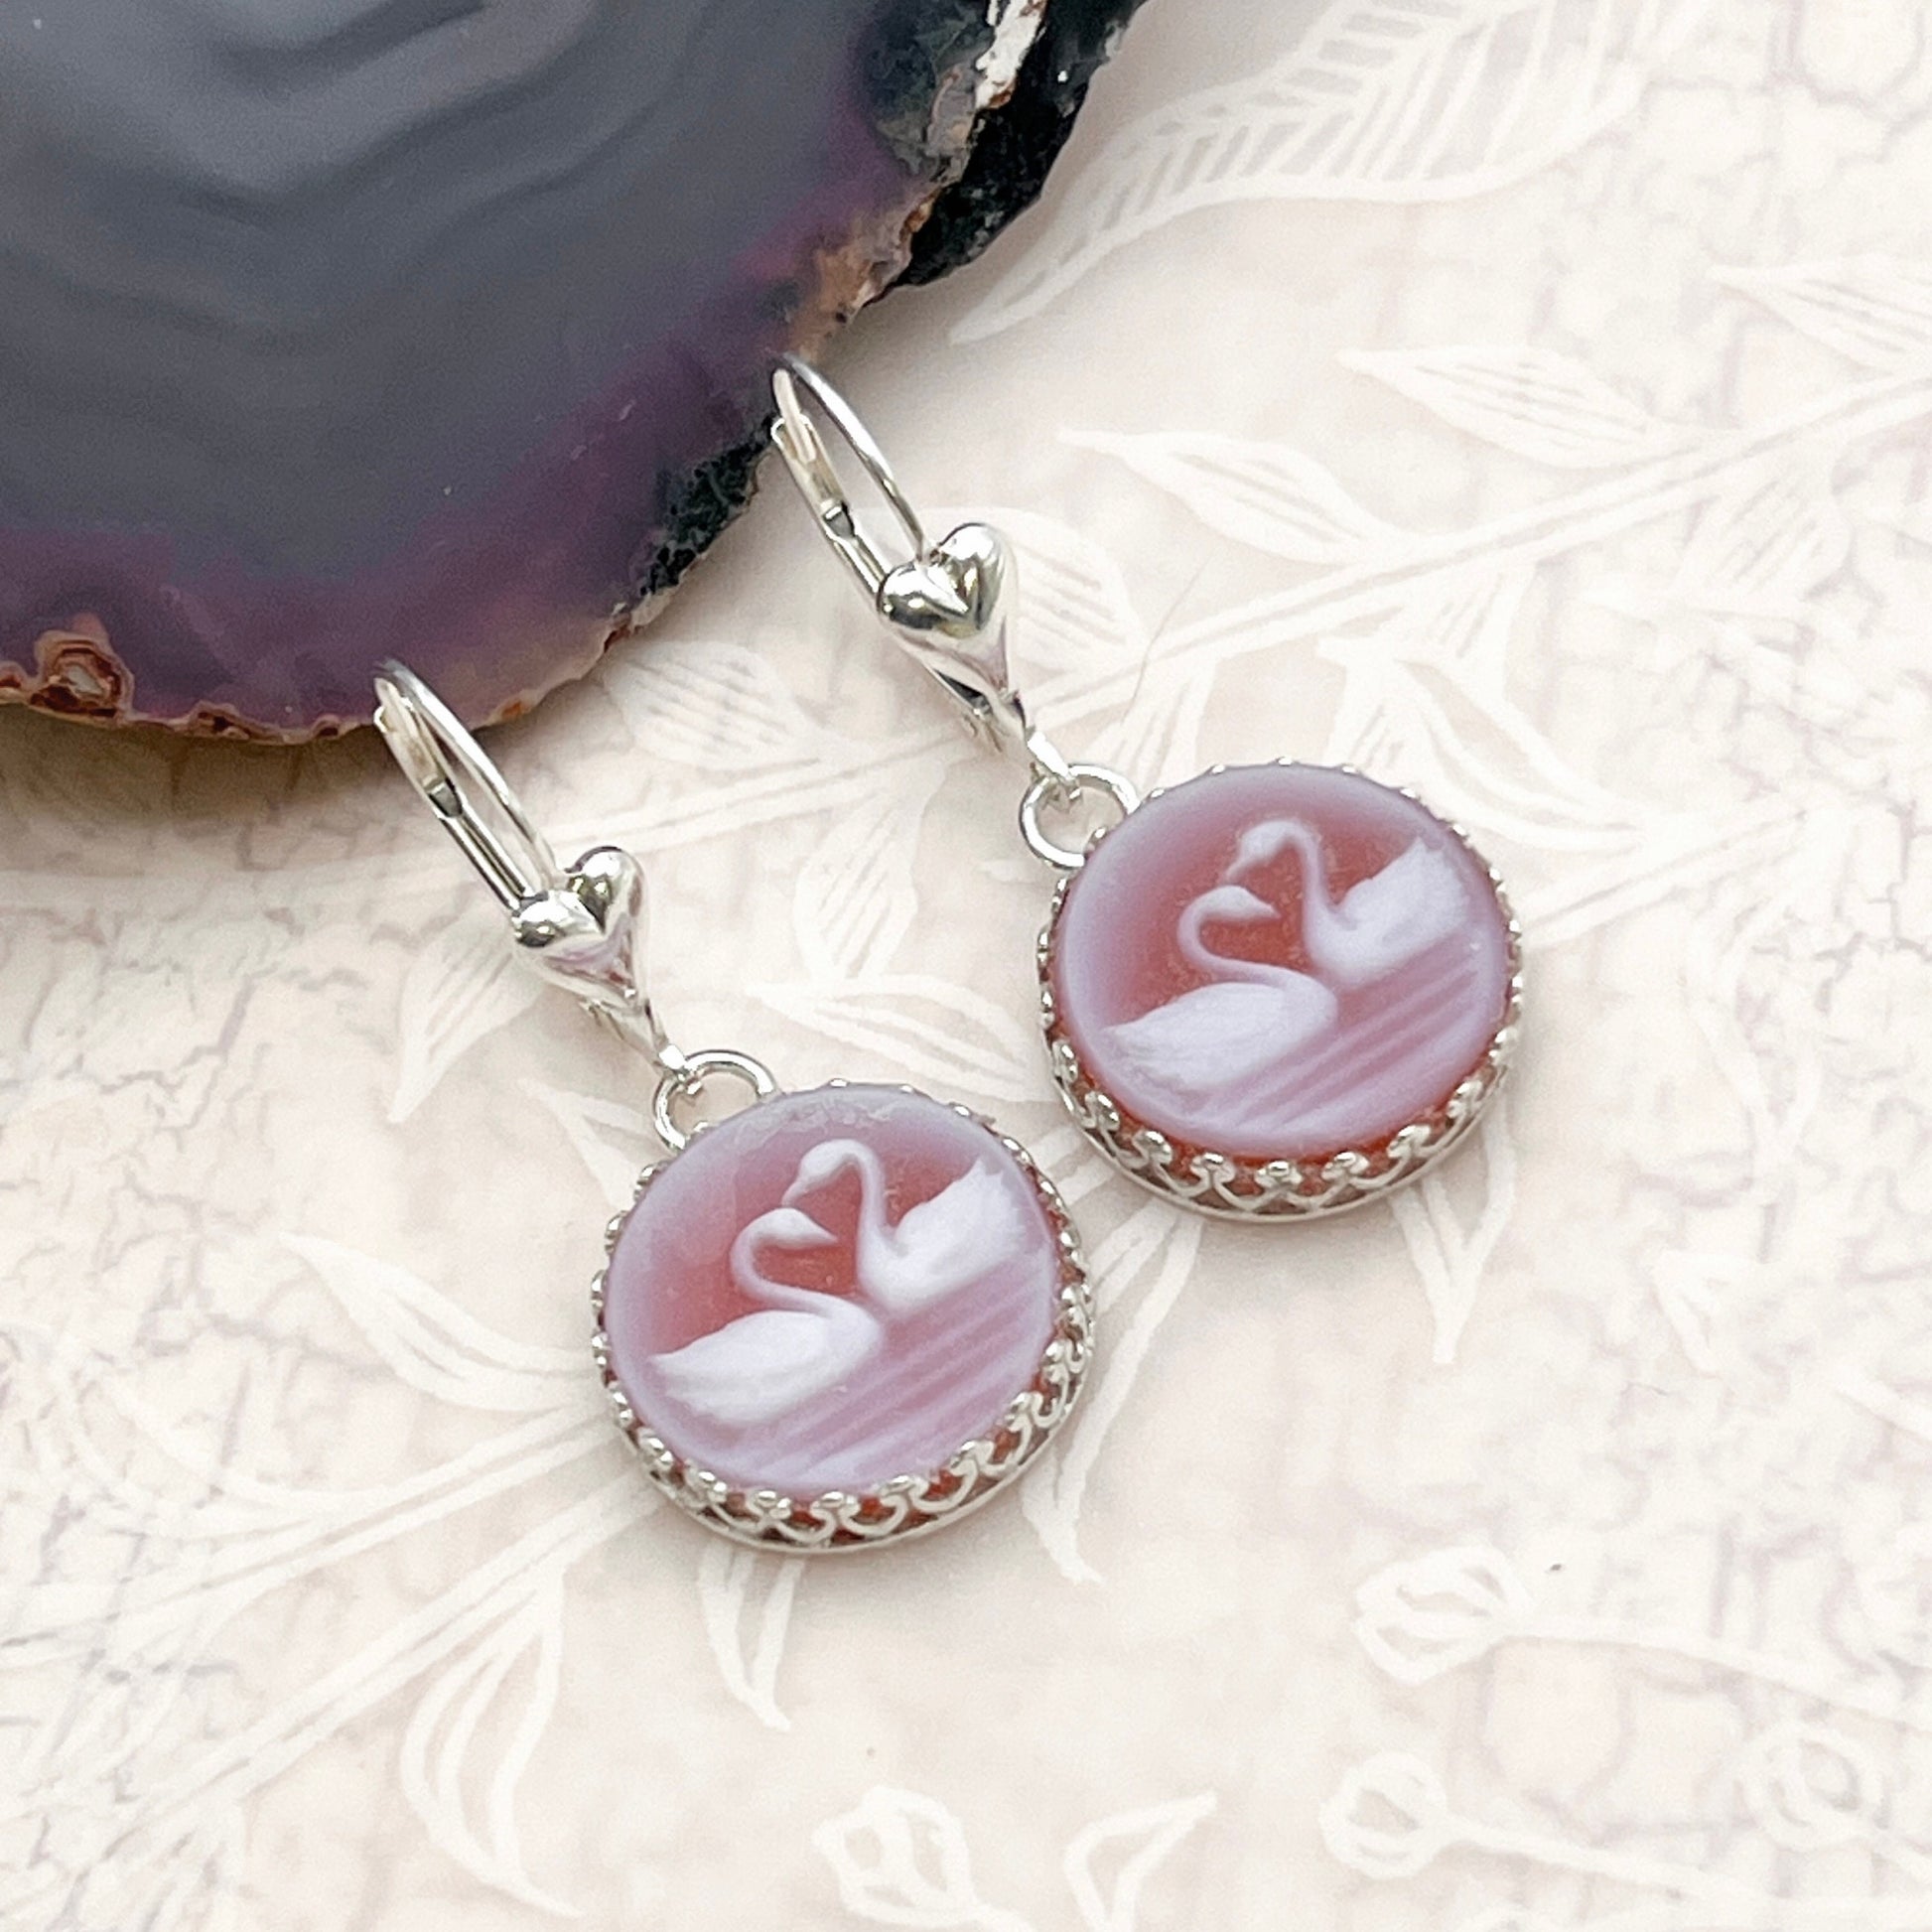 Gemstone Swan Cameo Earrings, Romantic Love Birds, Unique Anniversary Gifts for Wife, Sterling Silver Heart Earrings, Real Authentic Cameo